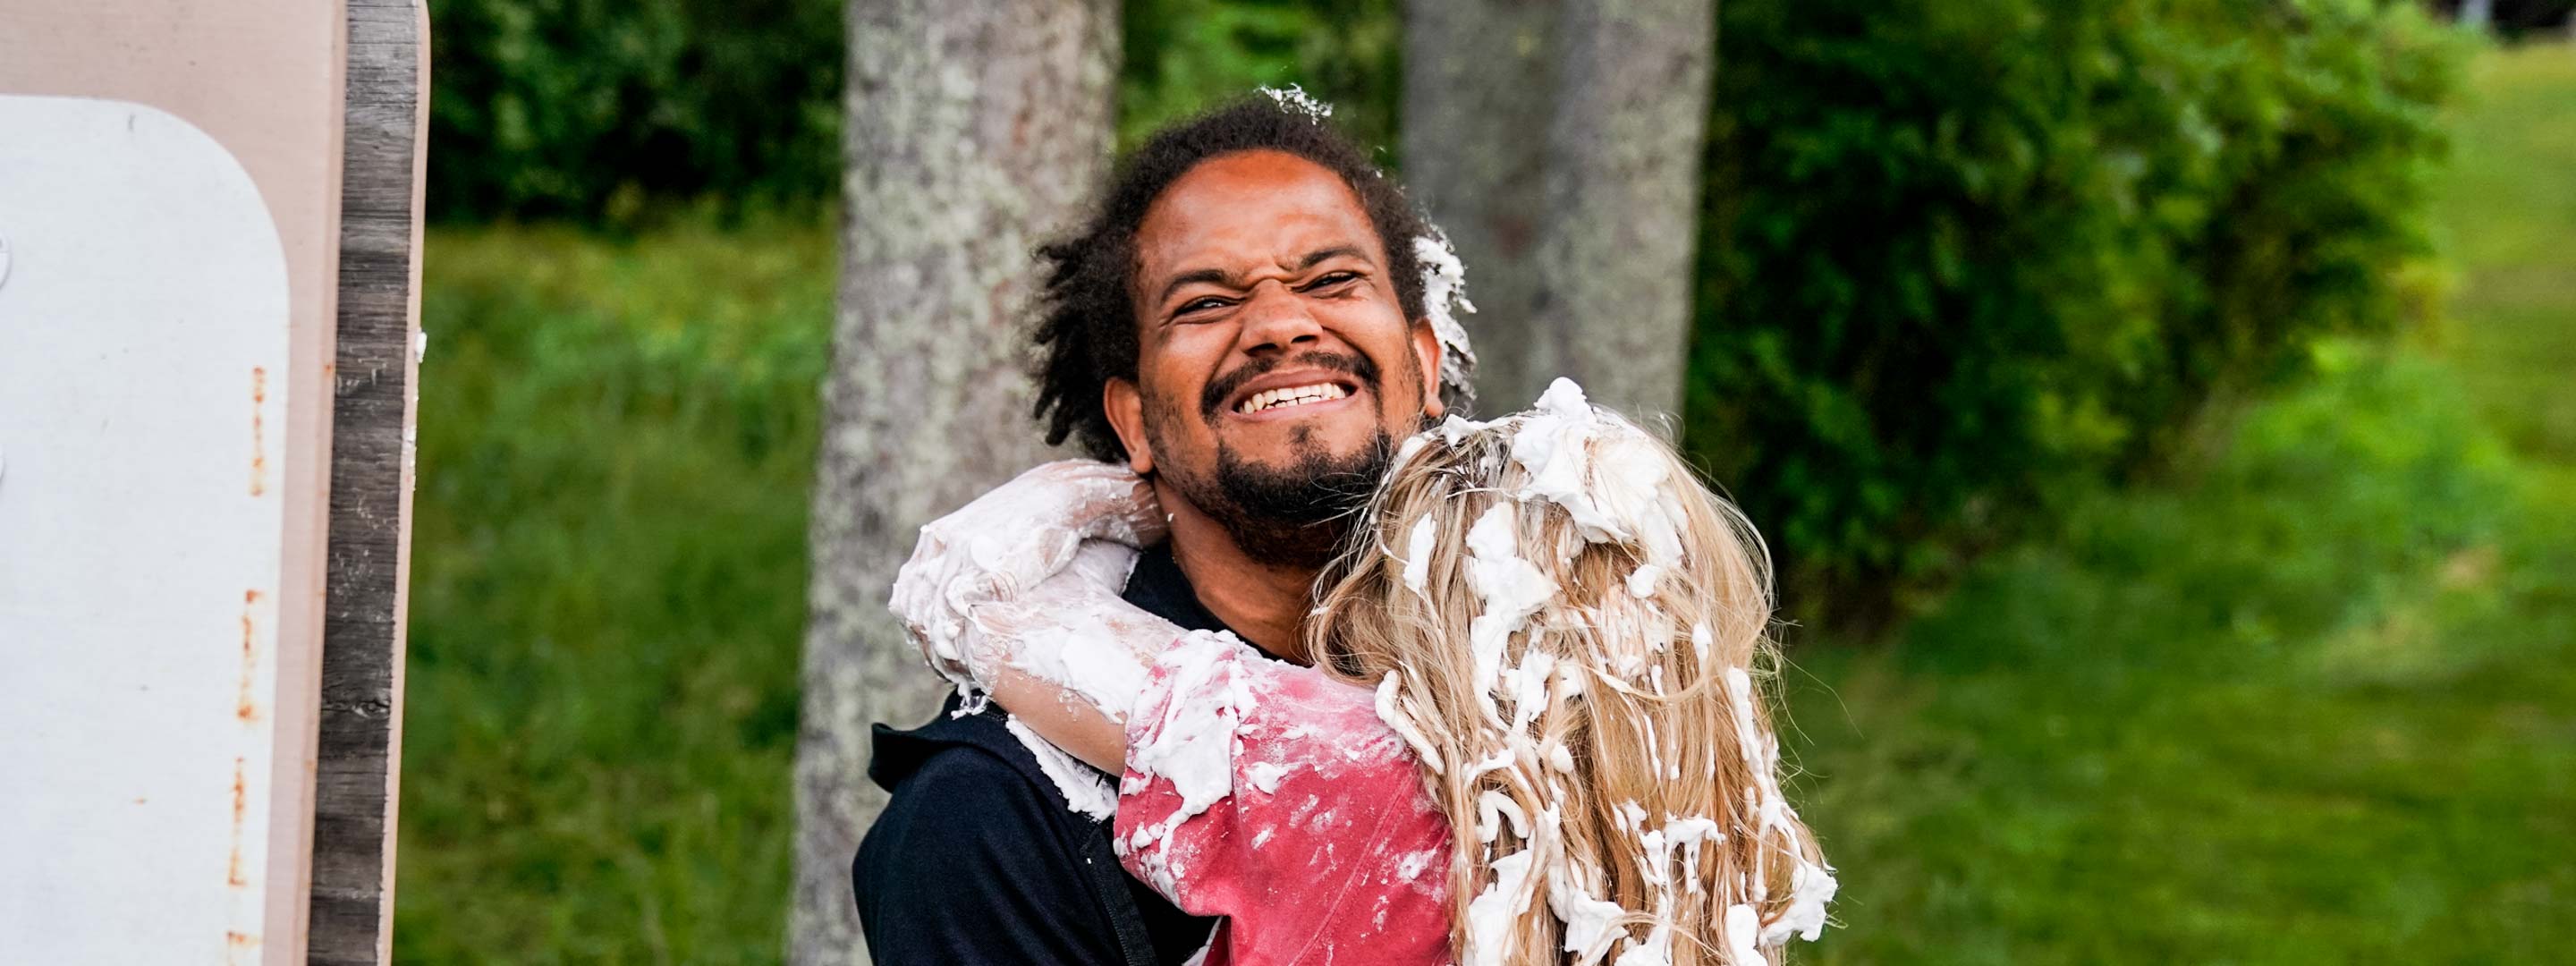 camper and counselor hugging with shaving cream on them